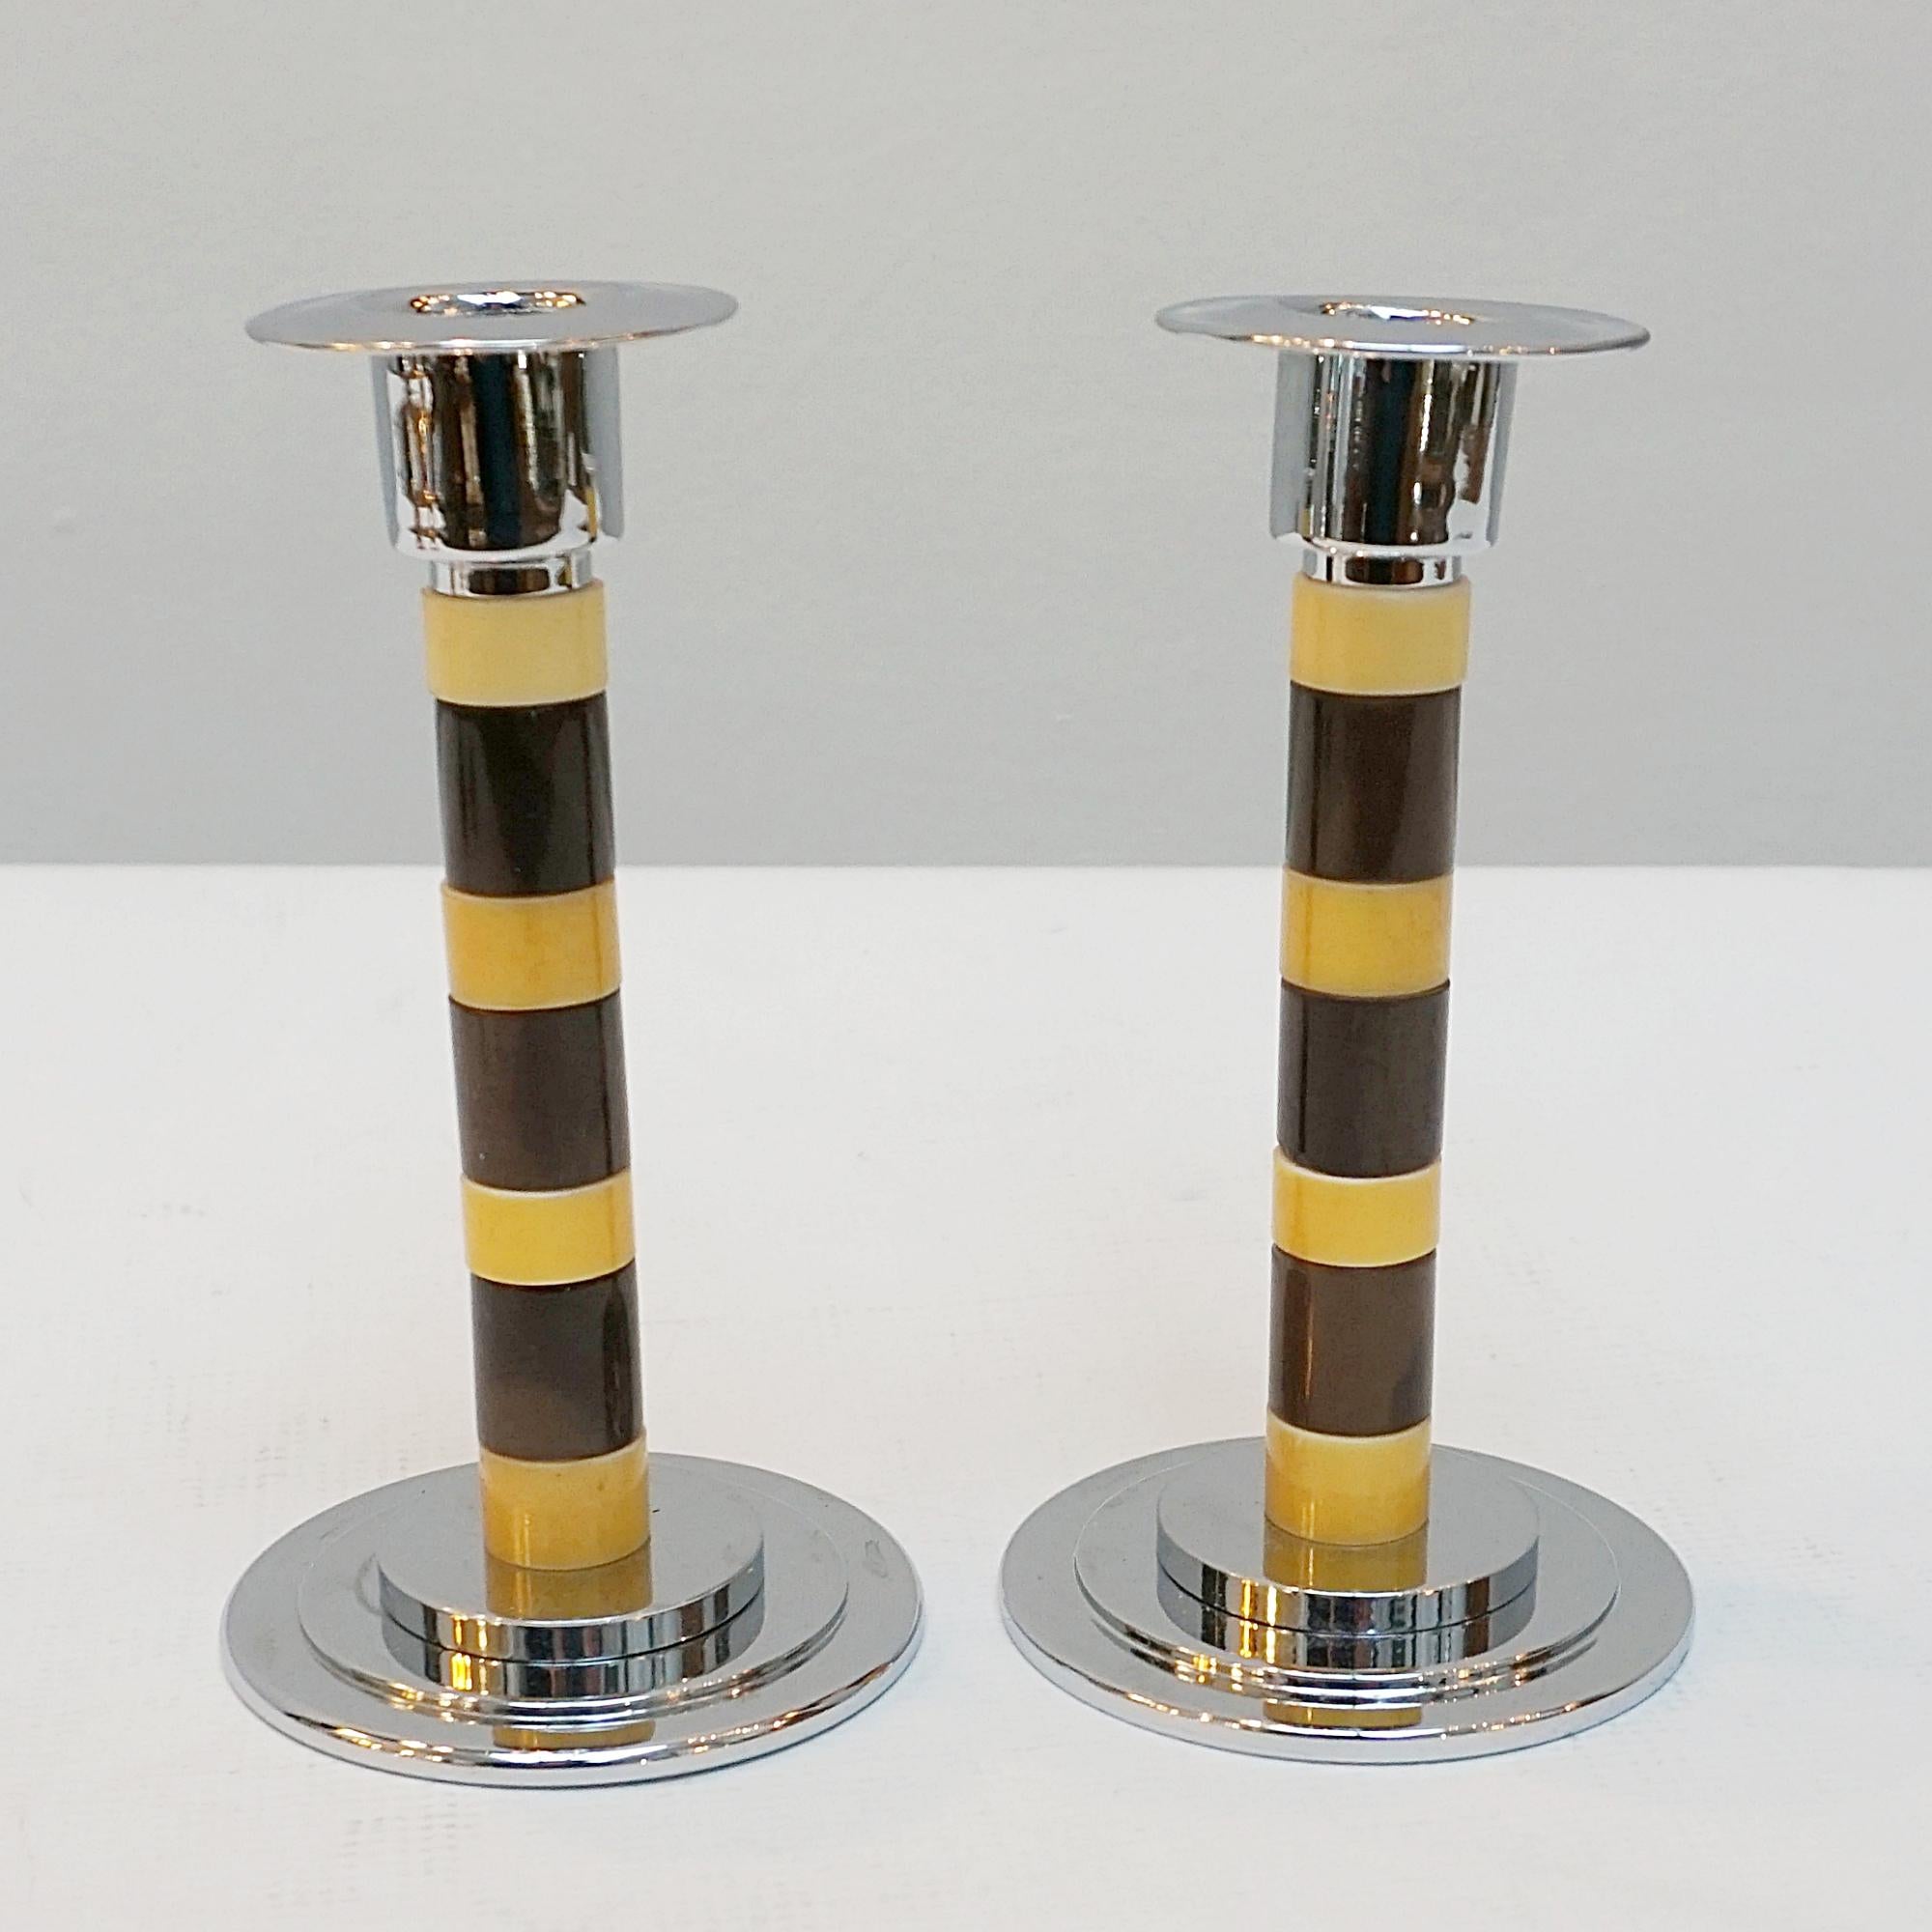 A pair of Art Deco style candlesticks. Brown and yellow dual ringed bakelite stem with chromed metal wax pan. Set over a rounded, stepped chromed metal base.

Dimensions: H 14cm W 7.5cm

Origin: English

Item Number: 2212233

Re-chromed and polished